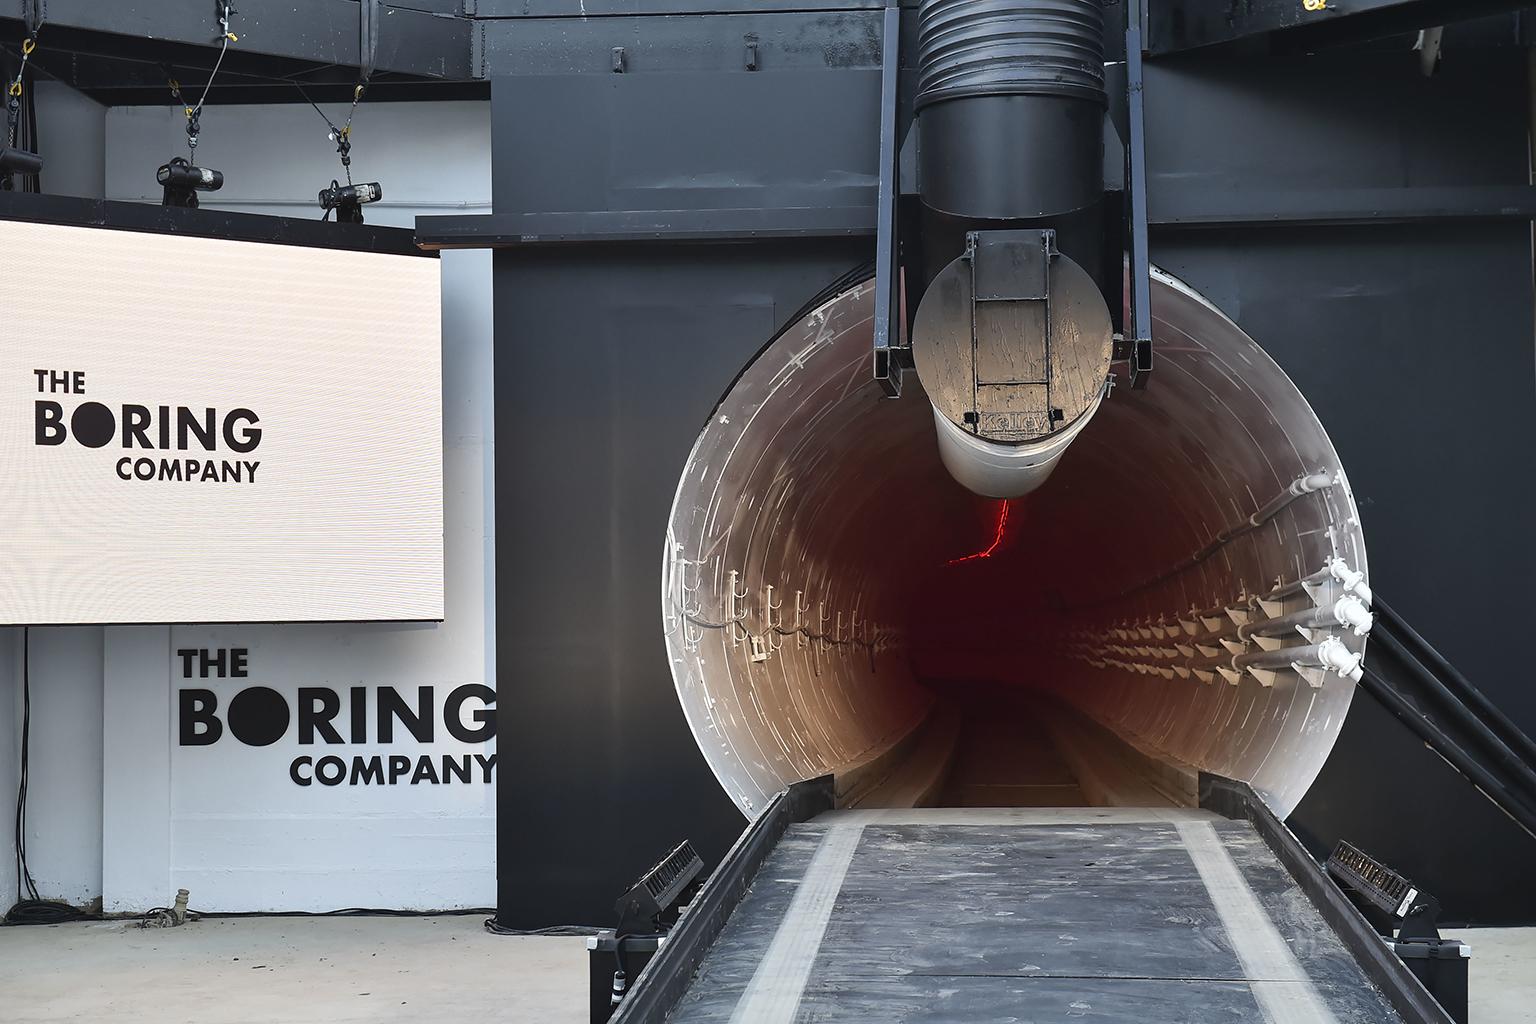 The Boring Company signage is displayed Tuesday, Dec. 18, 2018 at the tunnel entrance before an unveiling event for the Boring Co. Hawthorne test tunnel in Hawthorne, Calif. (Robyn Beck / Pool Photo via AP)